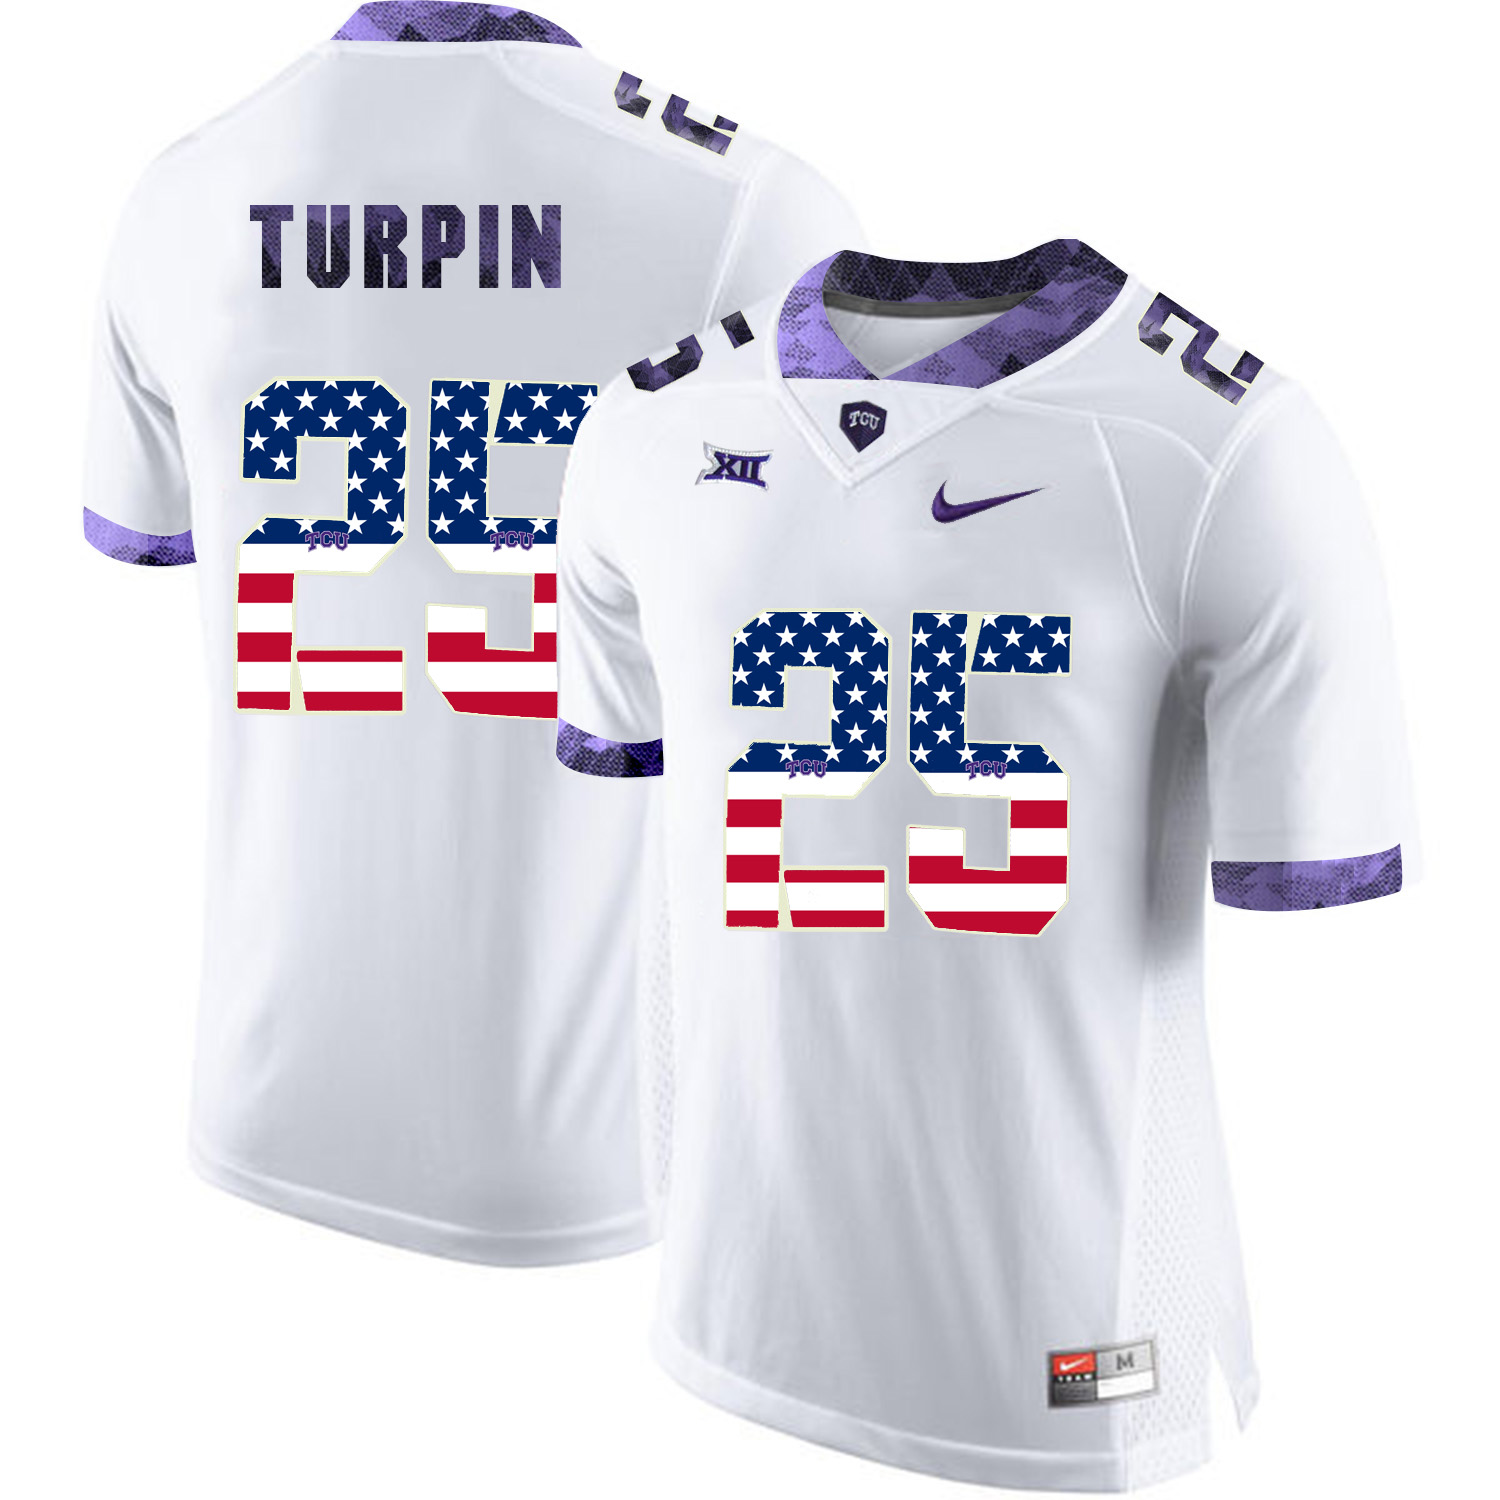 TCU Horned Frogs 25 TURPIN White USA Flag College Football Jersey